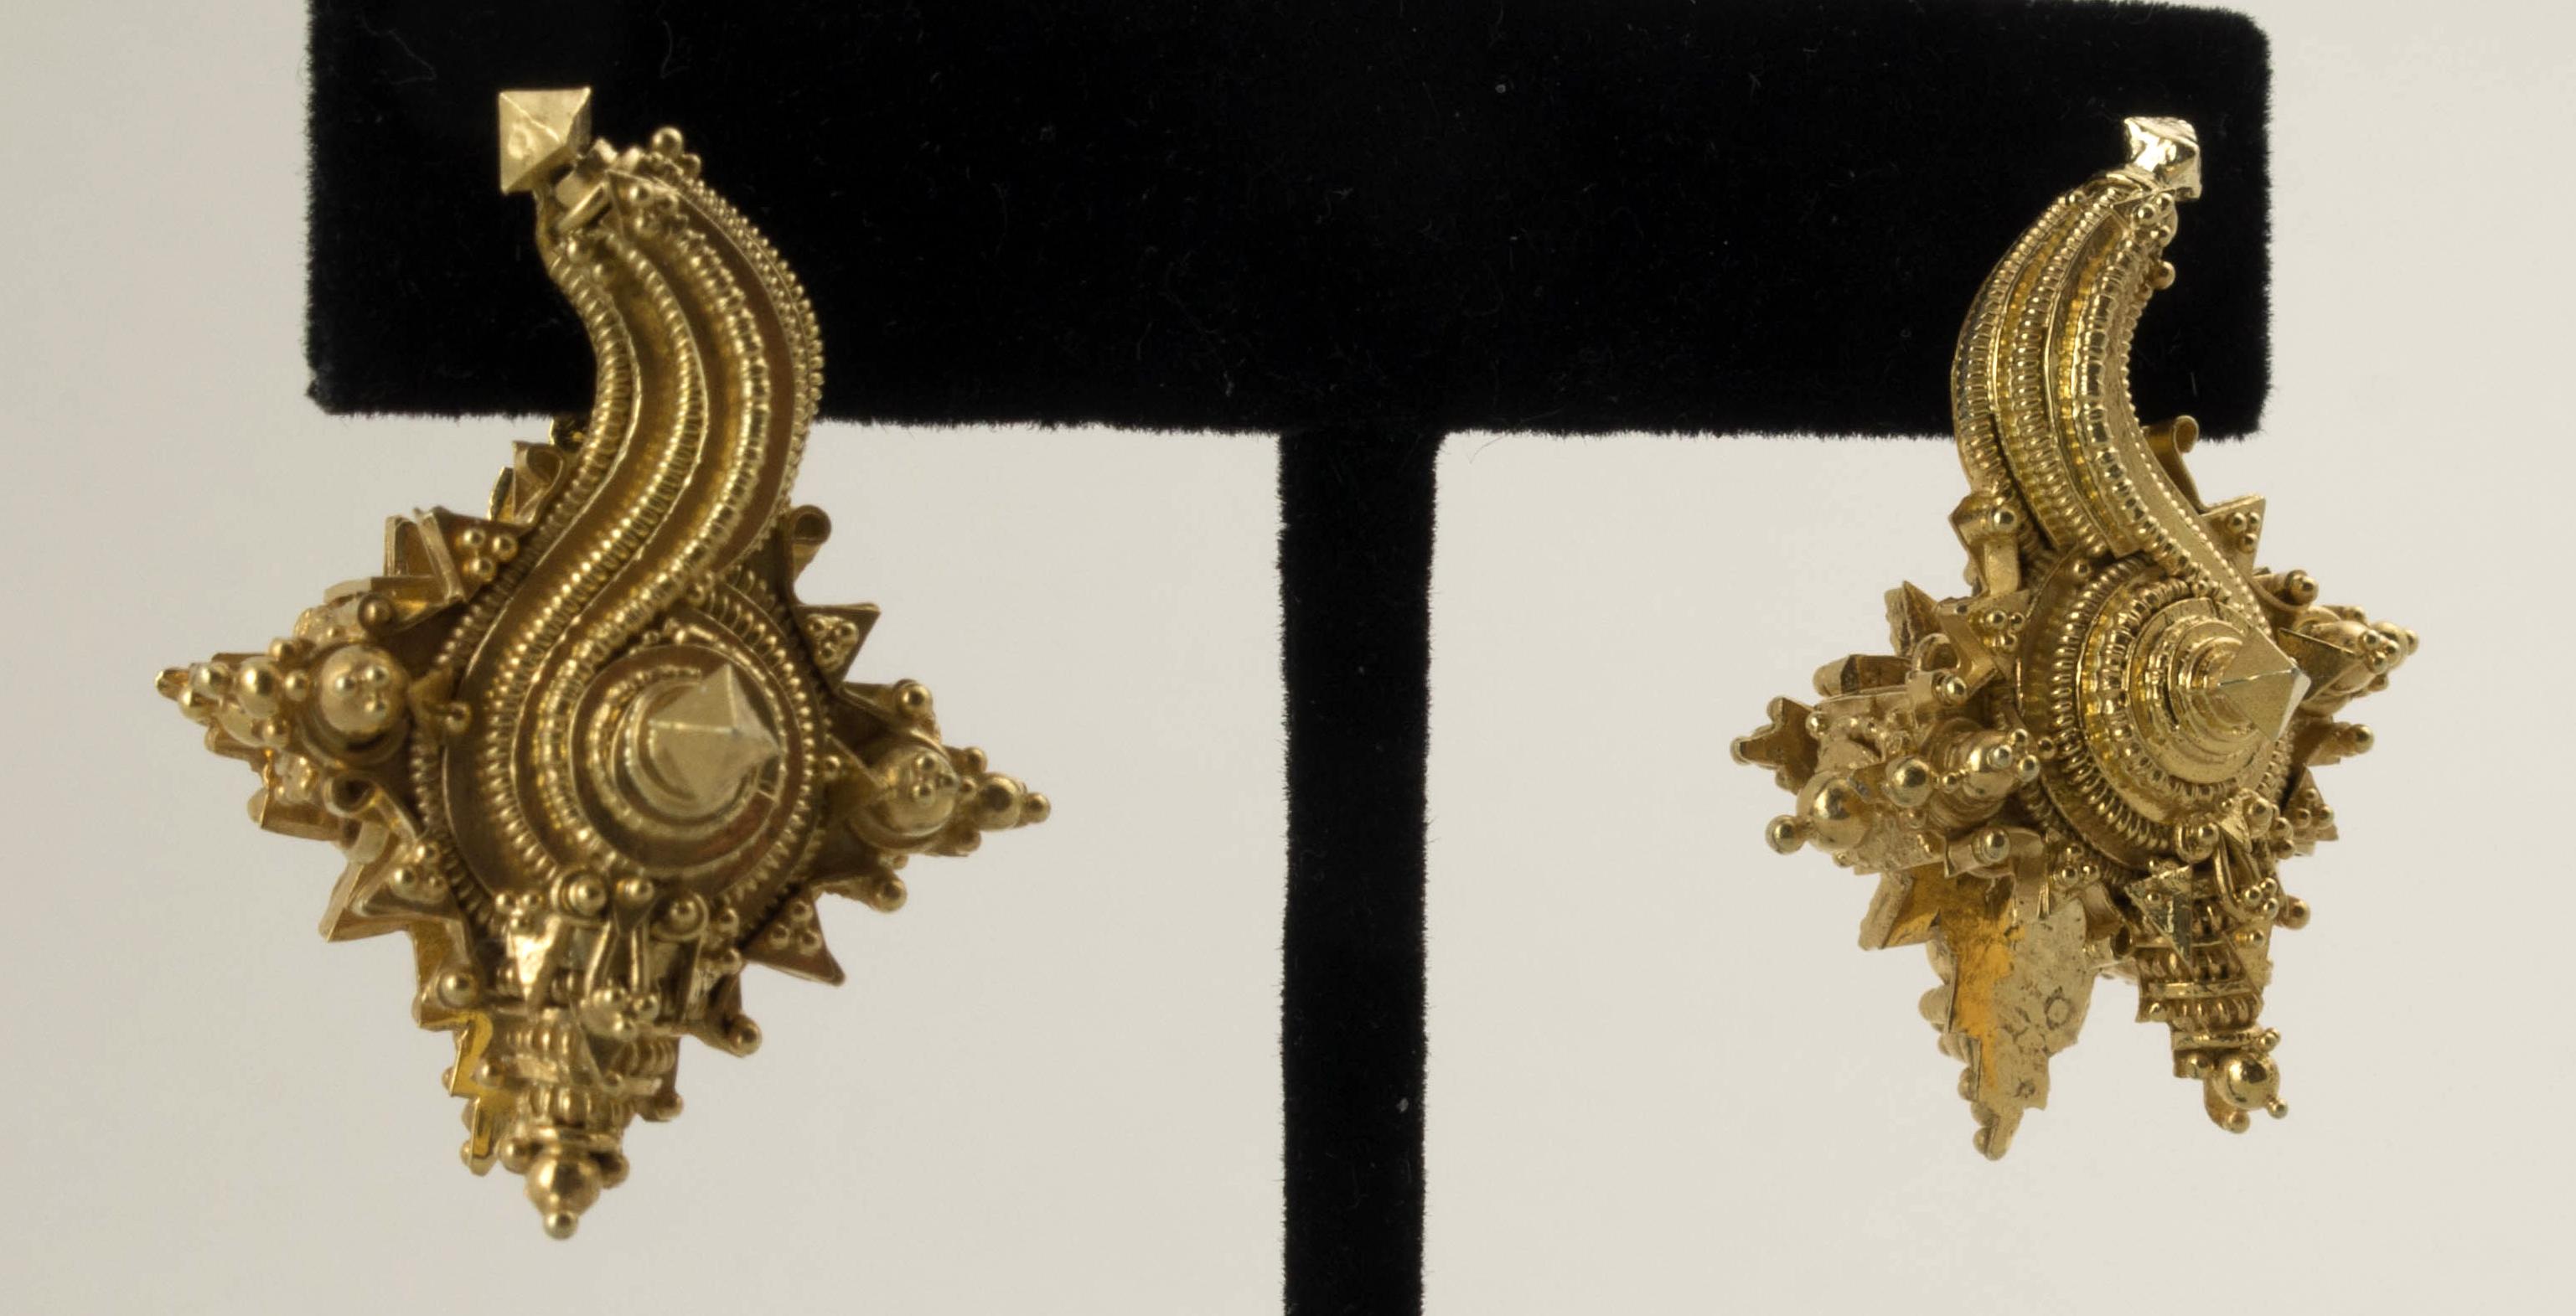 Antique Javanese 22k Gold Conch Shaped Earrings, 10th-15th Century, Indonesia For Sale 2